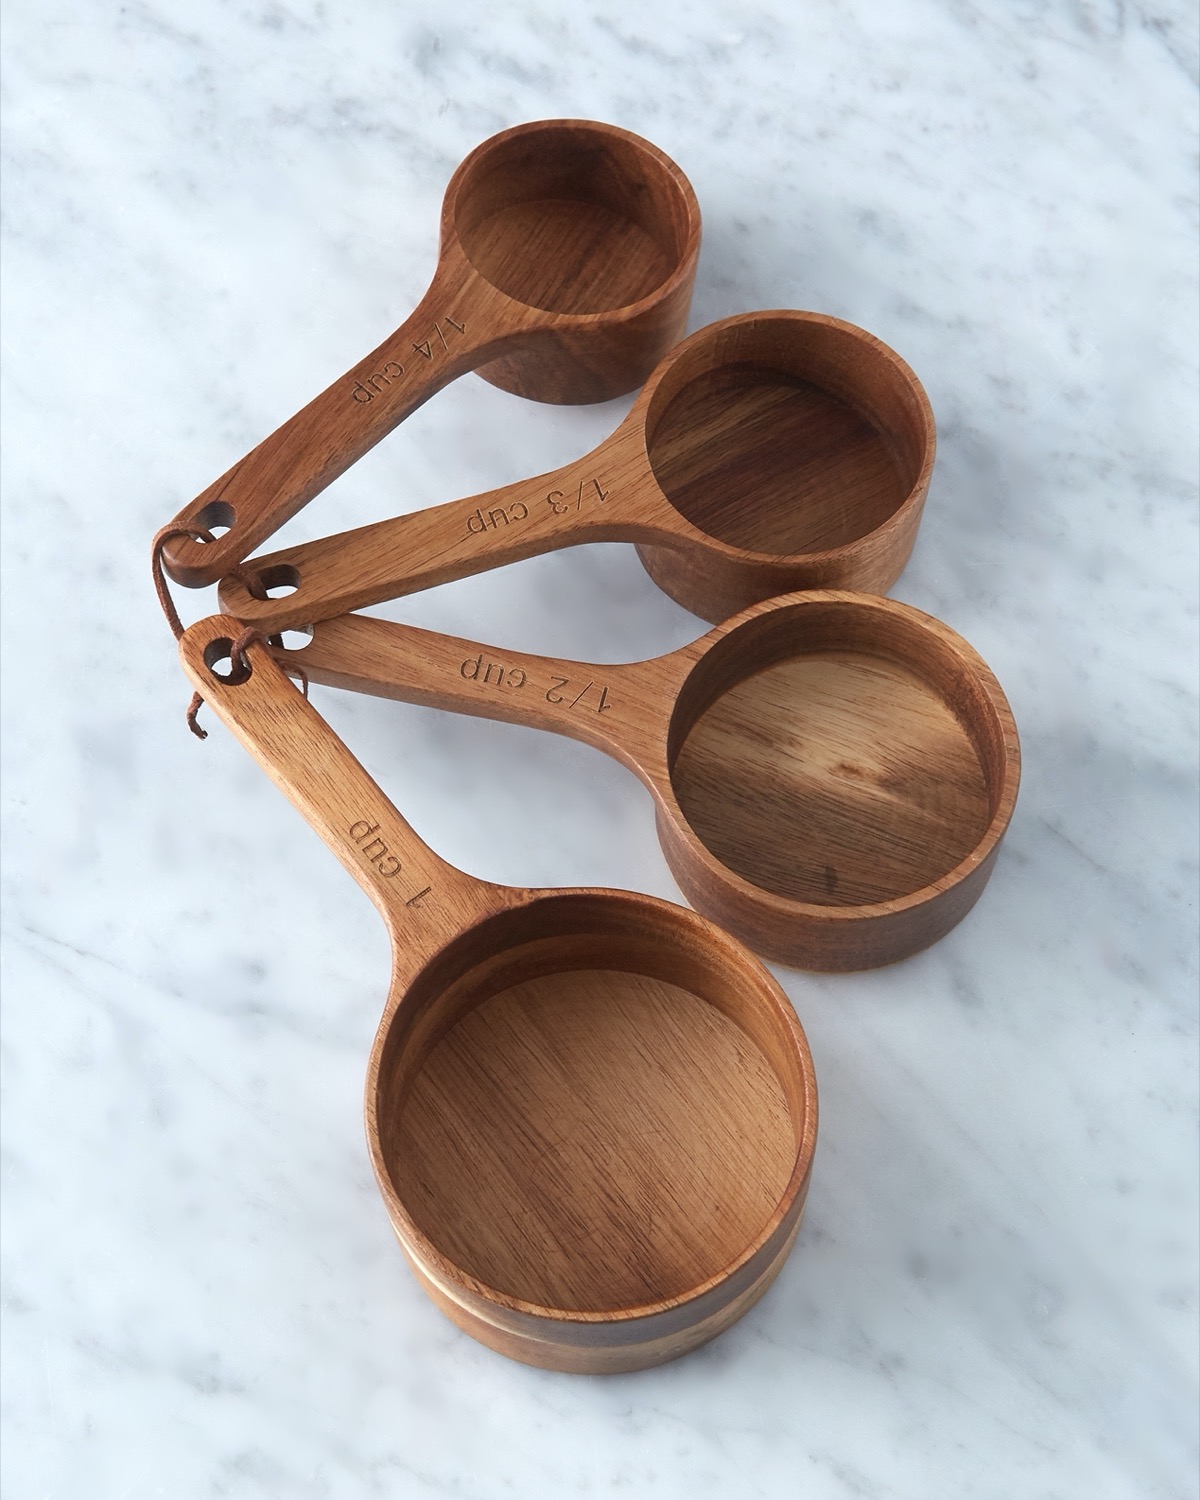 https://dunnes.btxmedia.com/pws/client/images/catalogue/products/3513162/zoom/3513162_wood.jpg